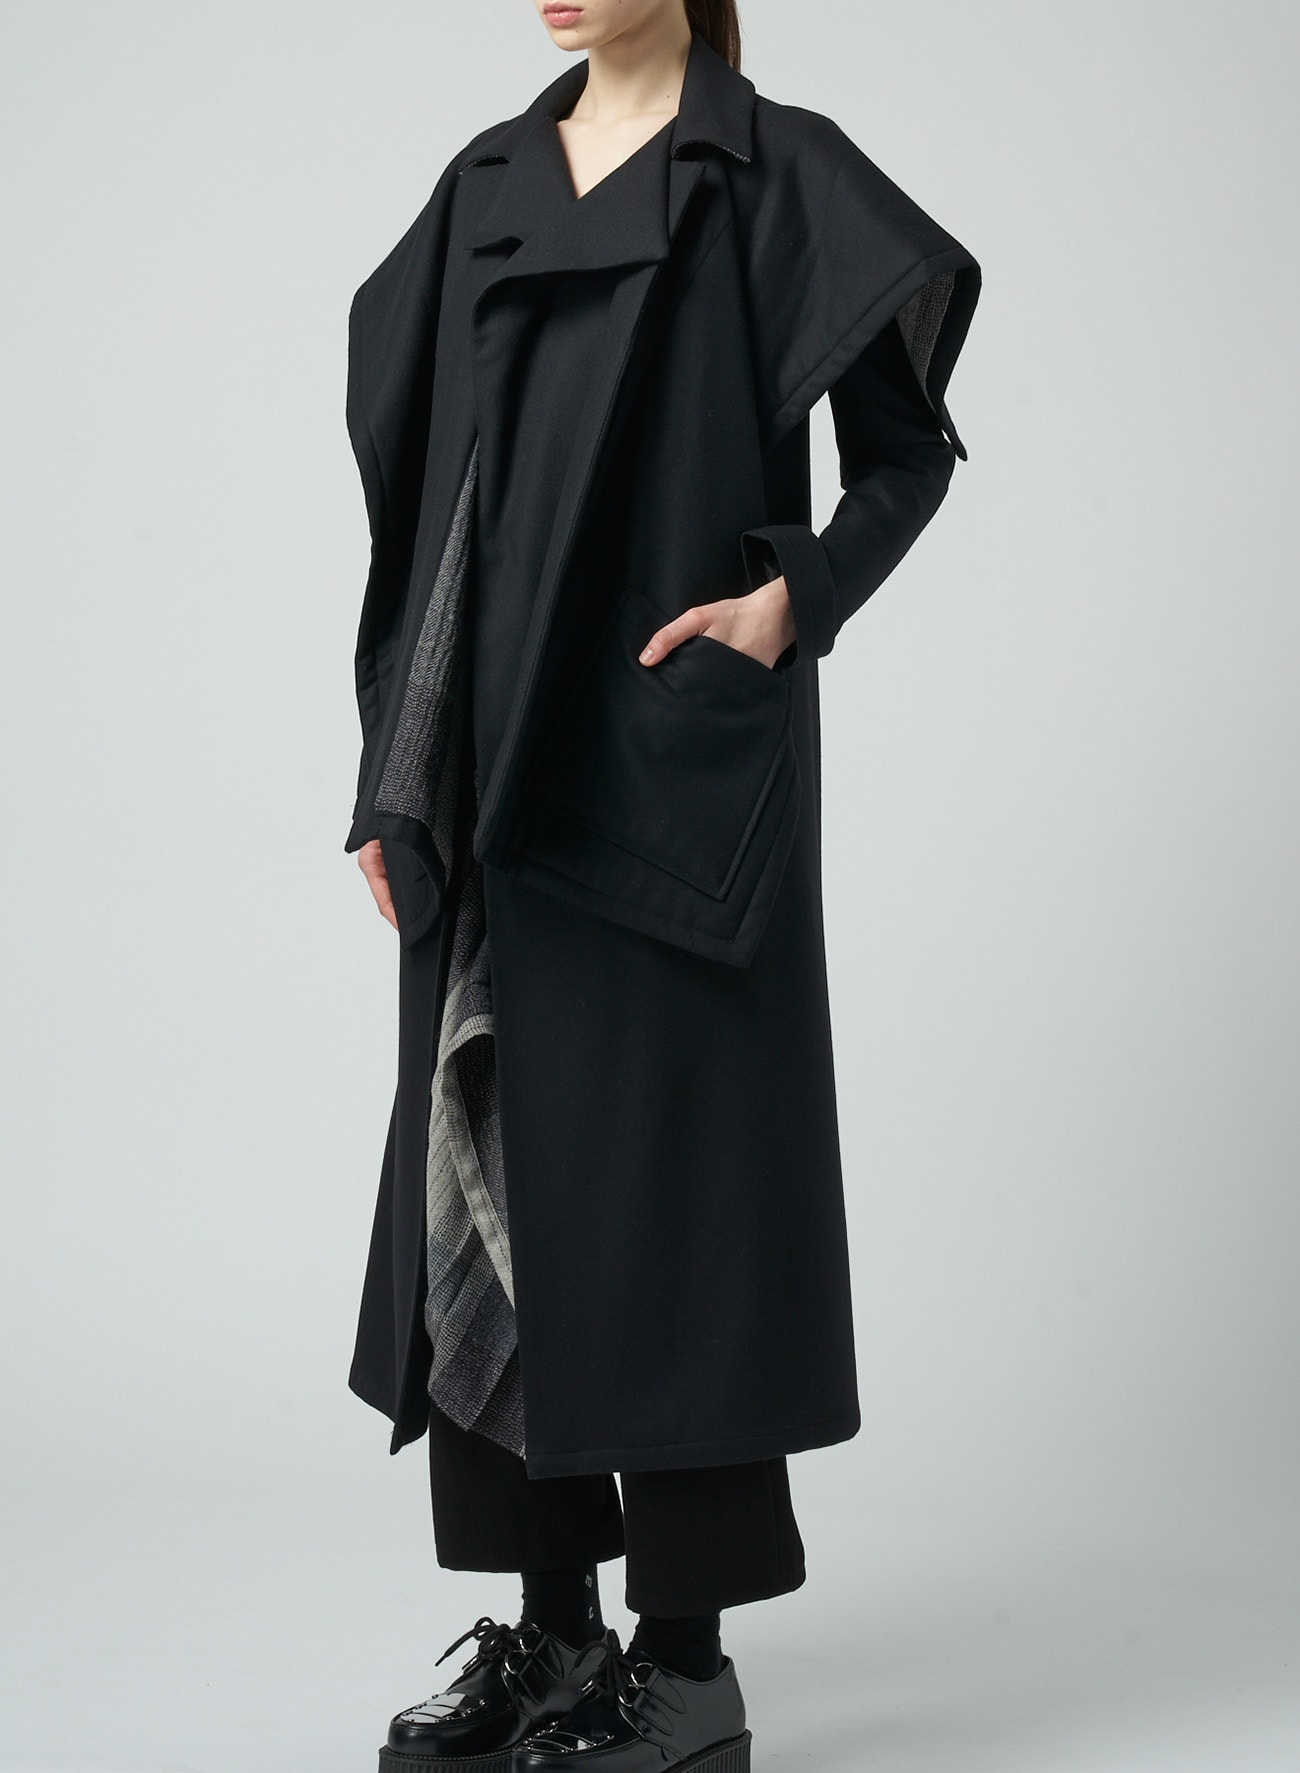 CAPE-STYLE COAT WITH PLAID PATTERN LINING